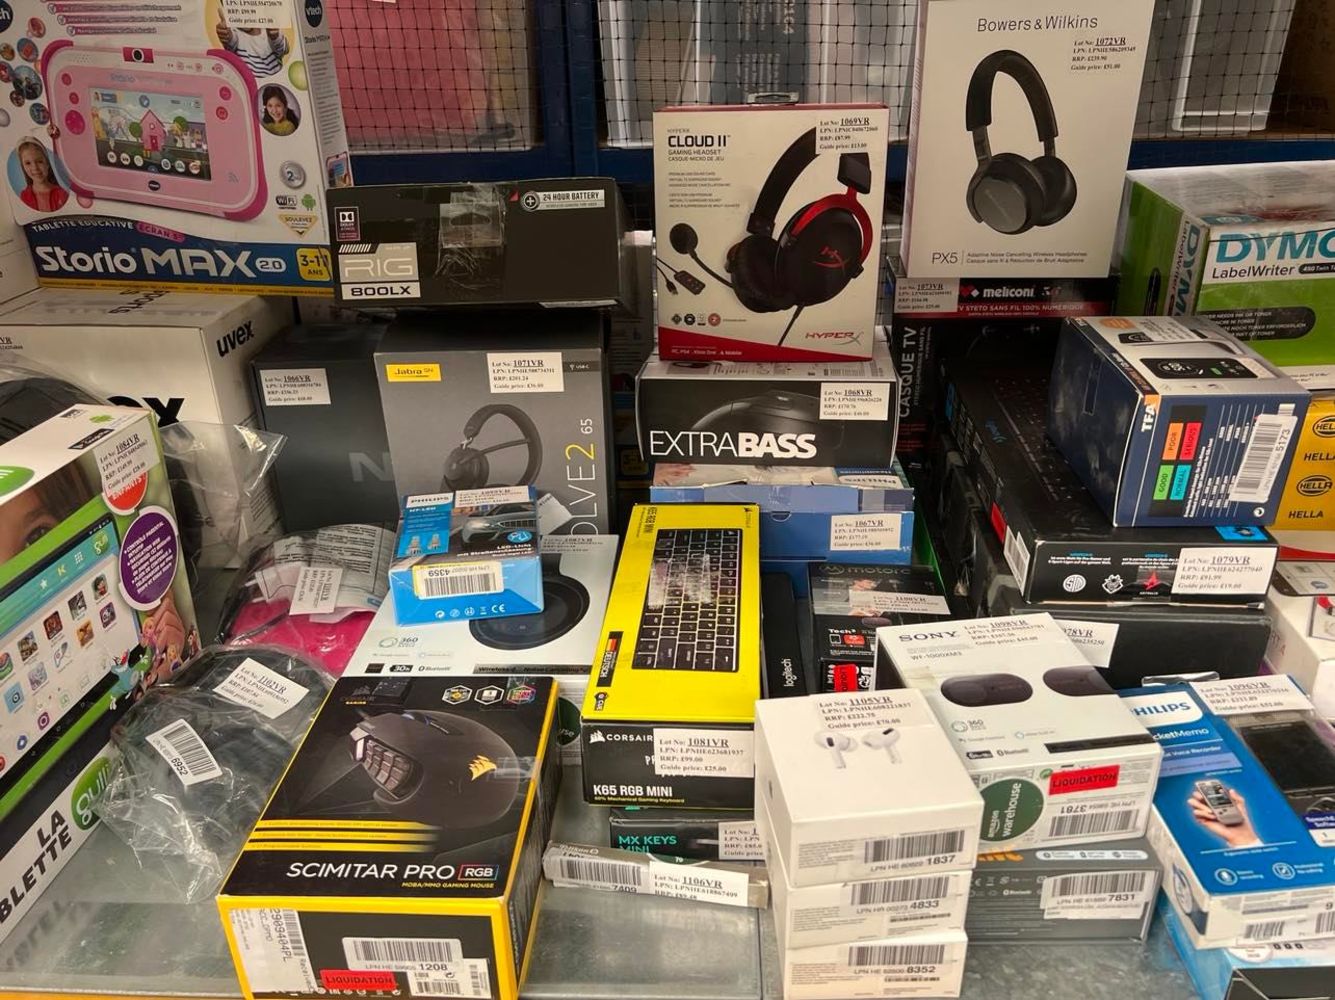 || General Sale! Amazon Raw Returns|| Apple, Hoover, HP, Samsung, Boss || AirPods,Vaccum cleaners, Headsets,Watches||